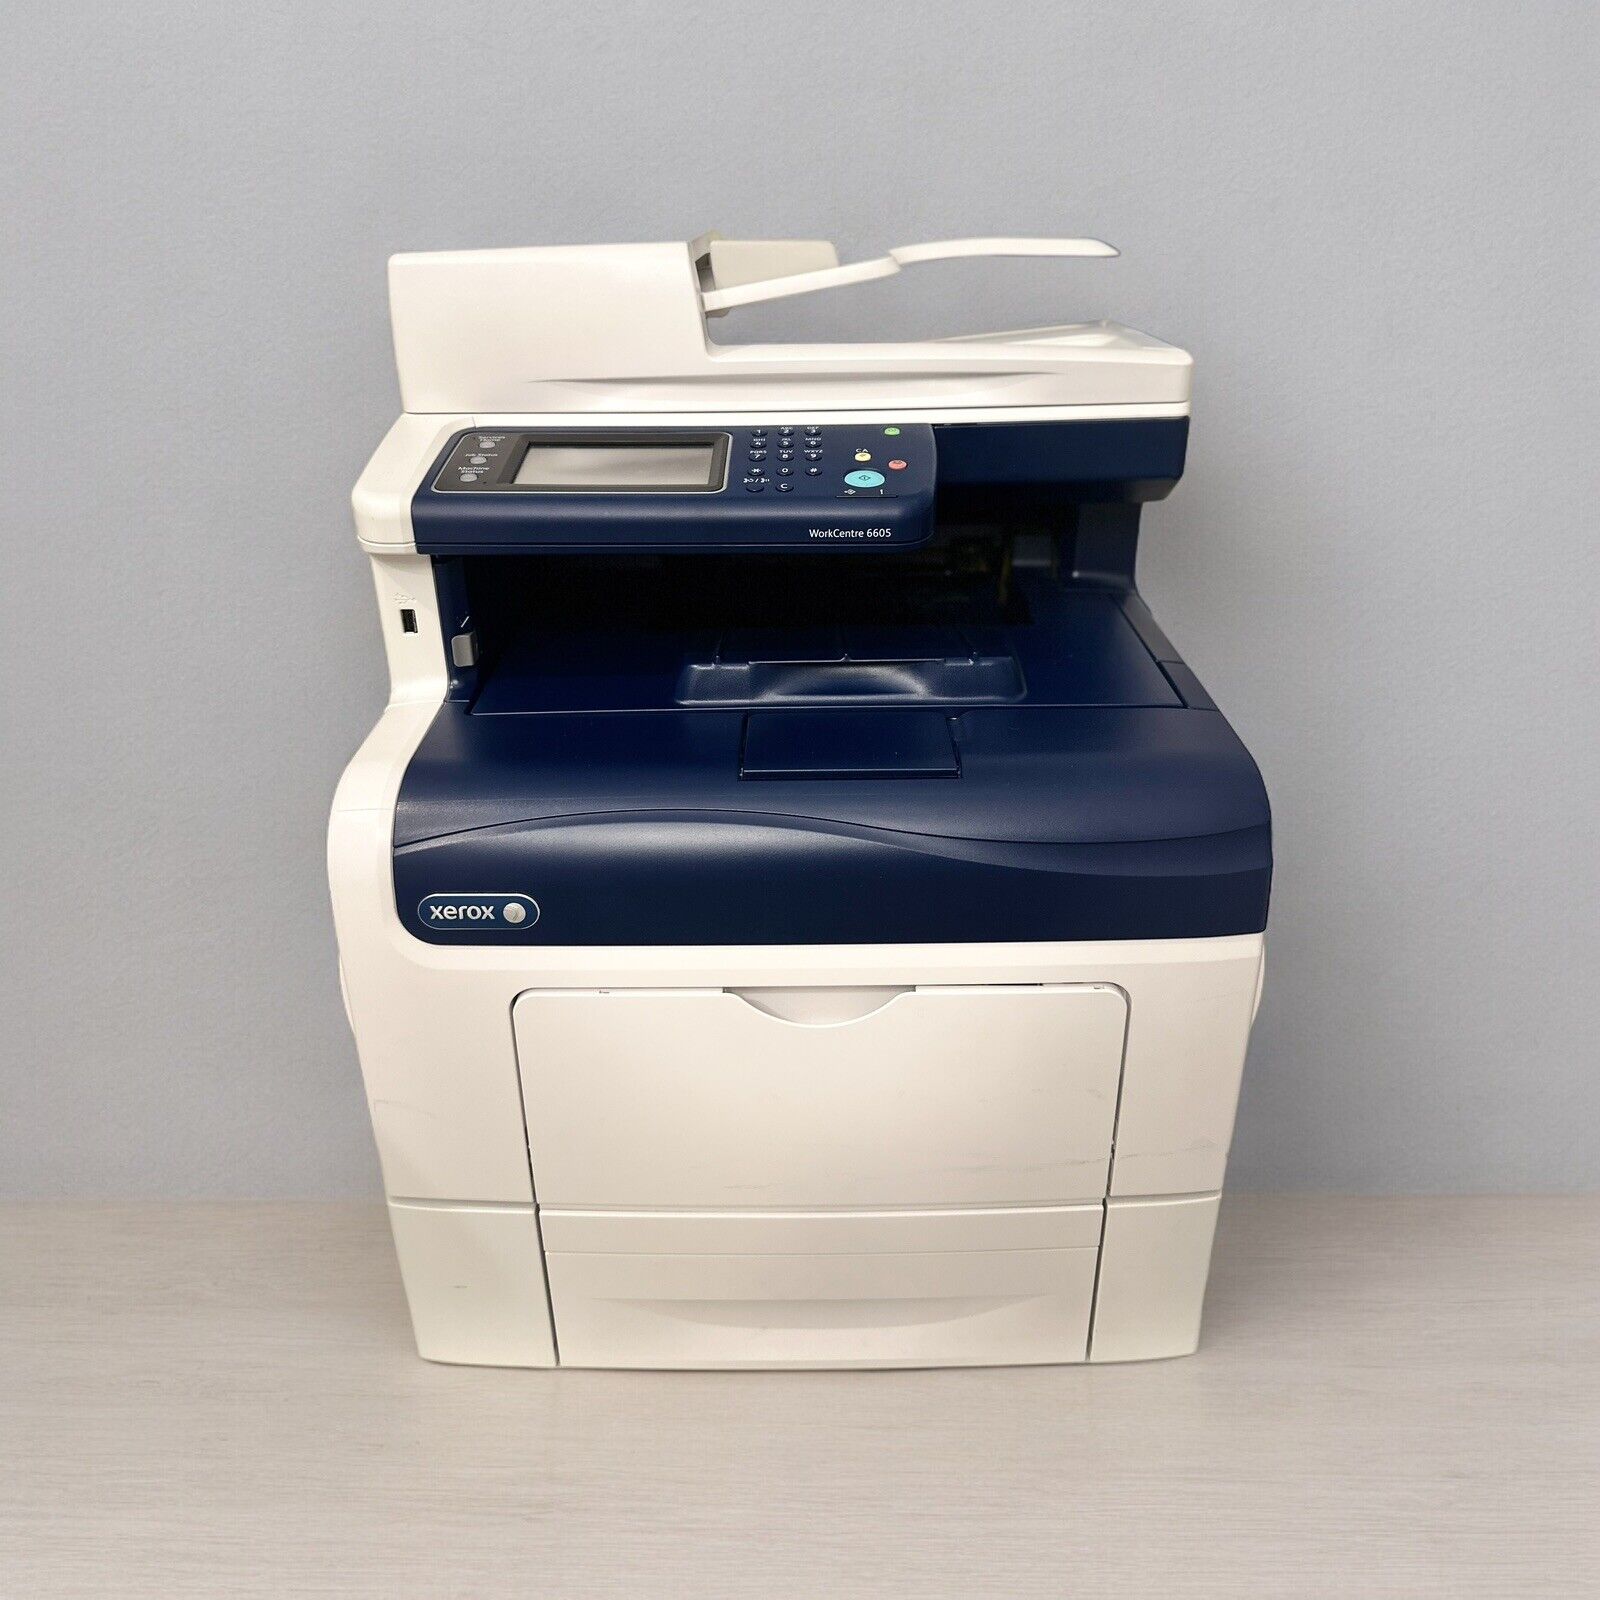 Xerox WorkCentre 6605 Multifunction Color Laser Printer Works Perfectly